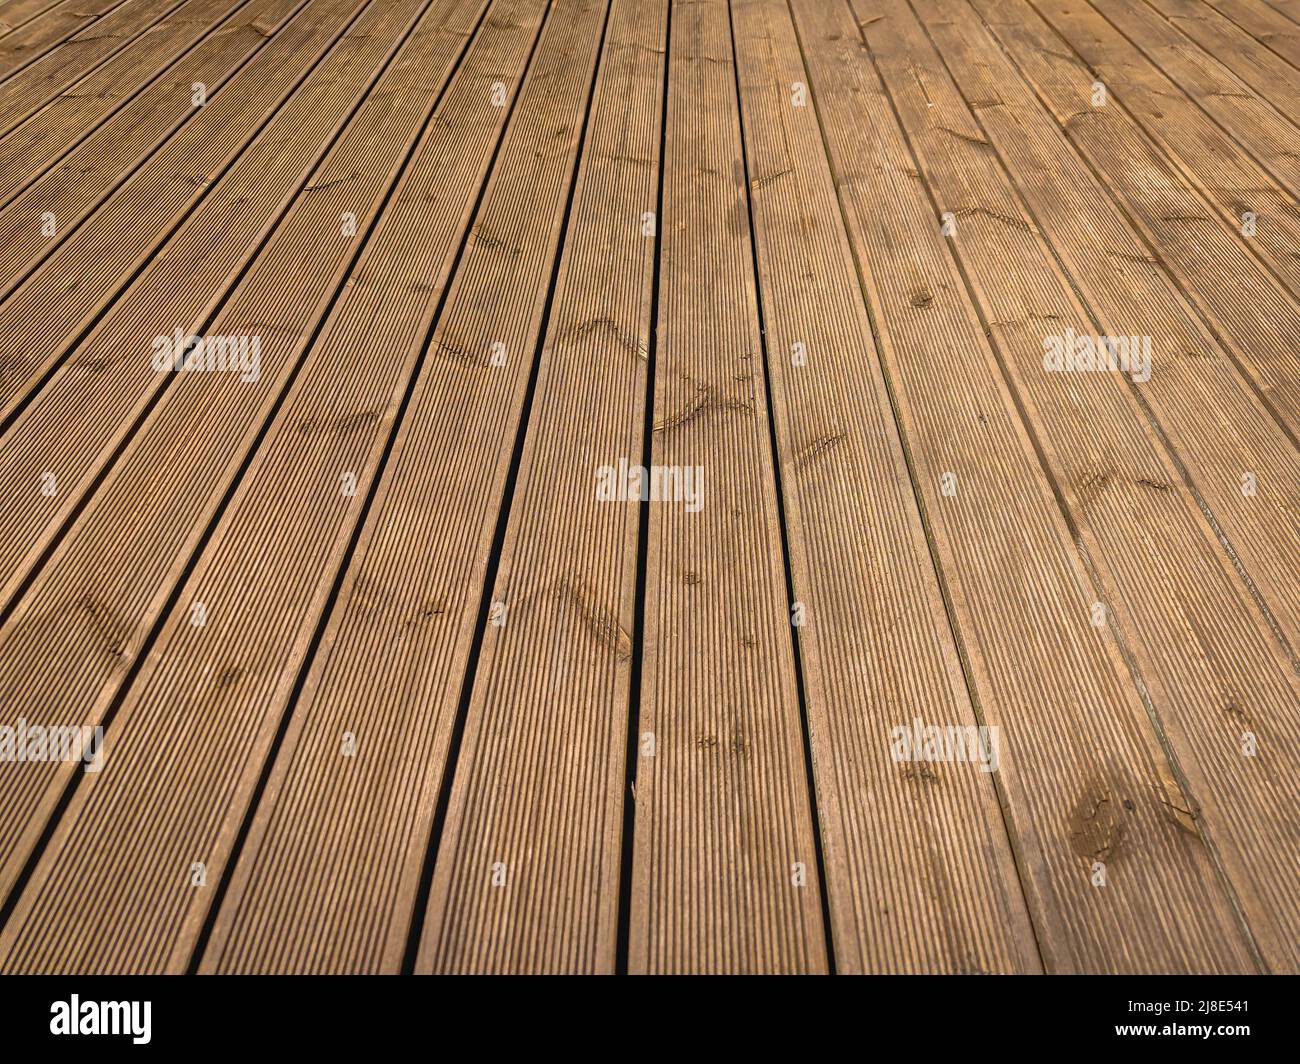 Wooden terrace with brown boards on the terrace floor. Decking without nails Stock Photo